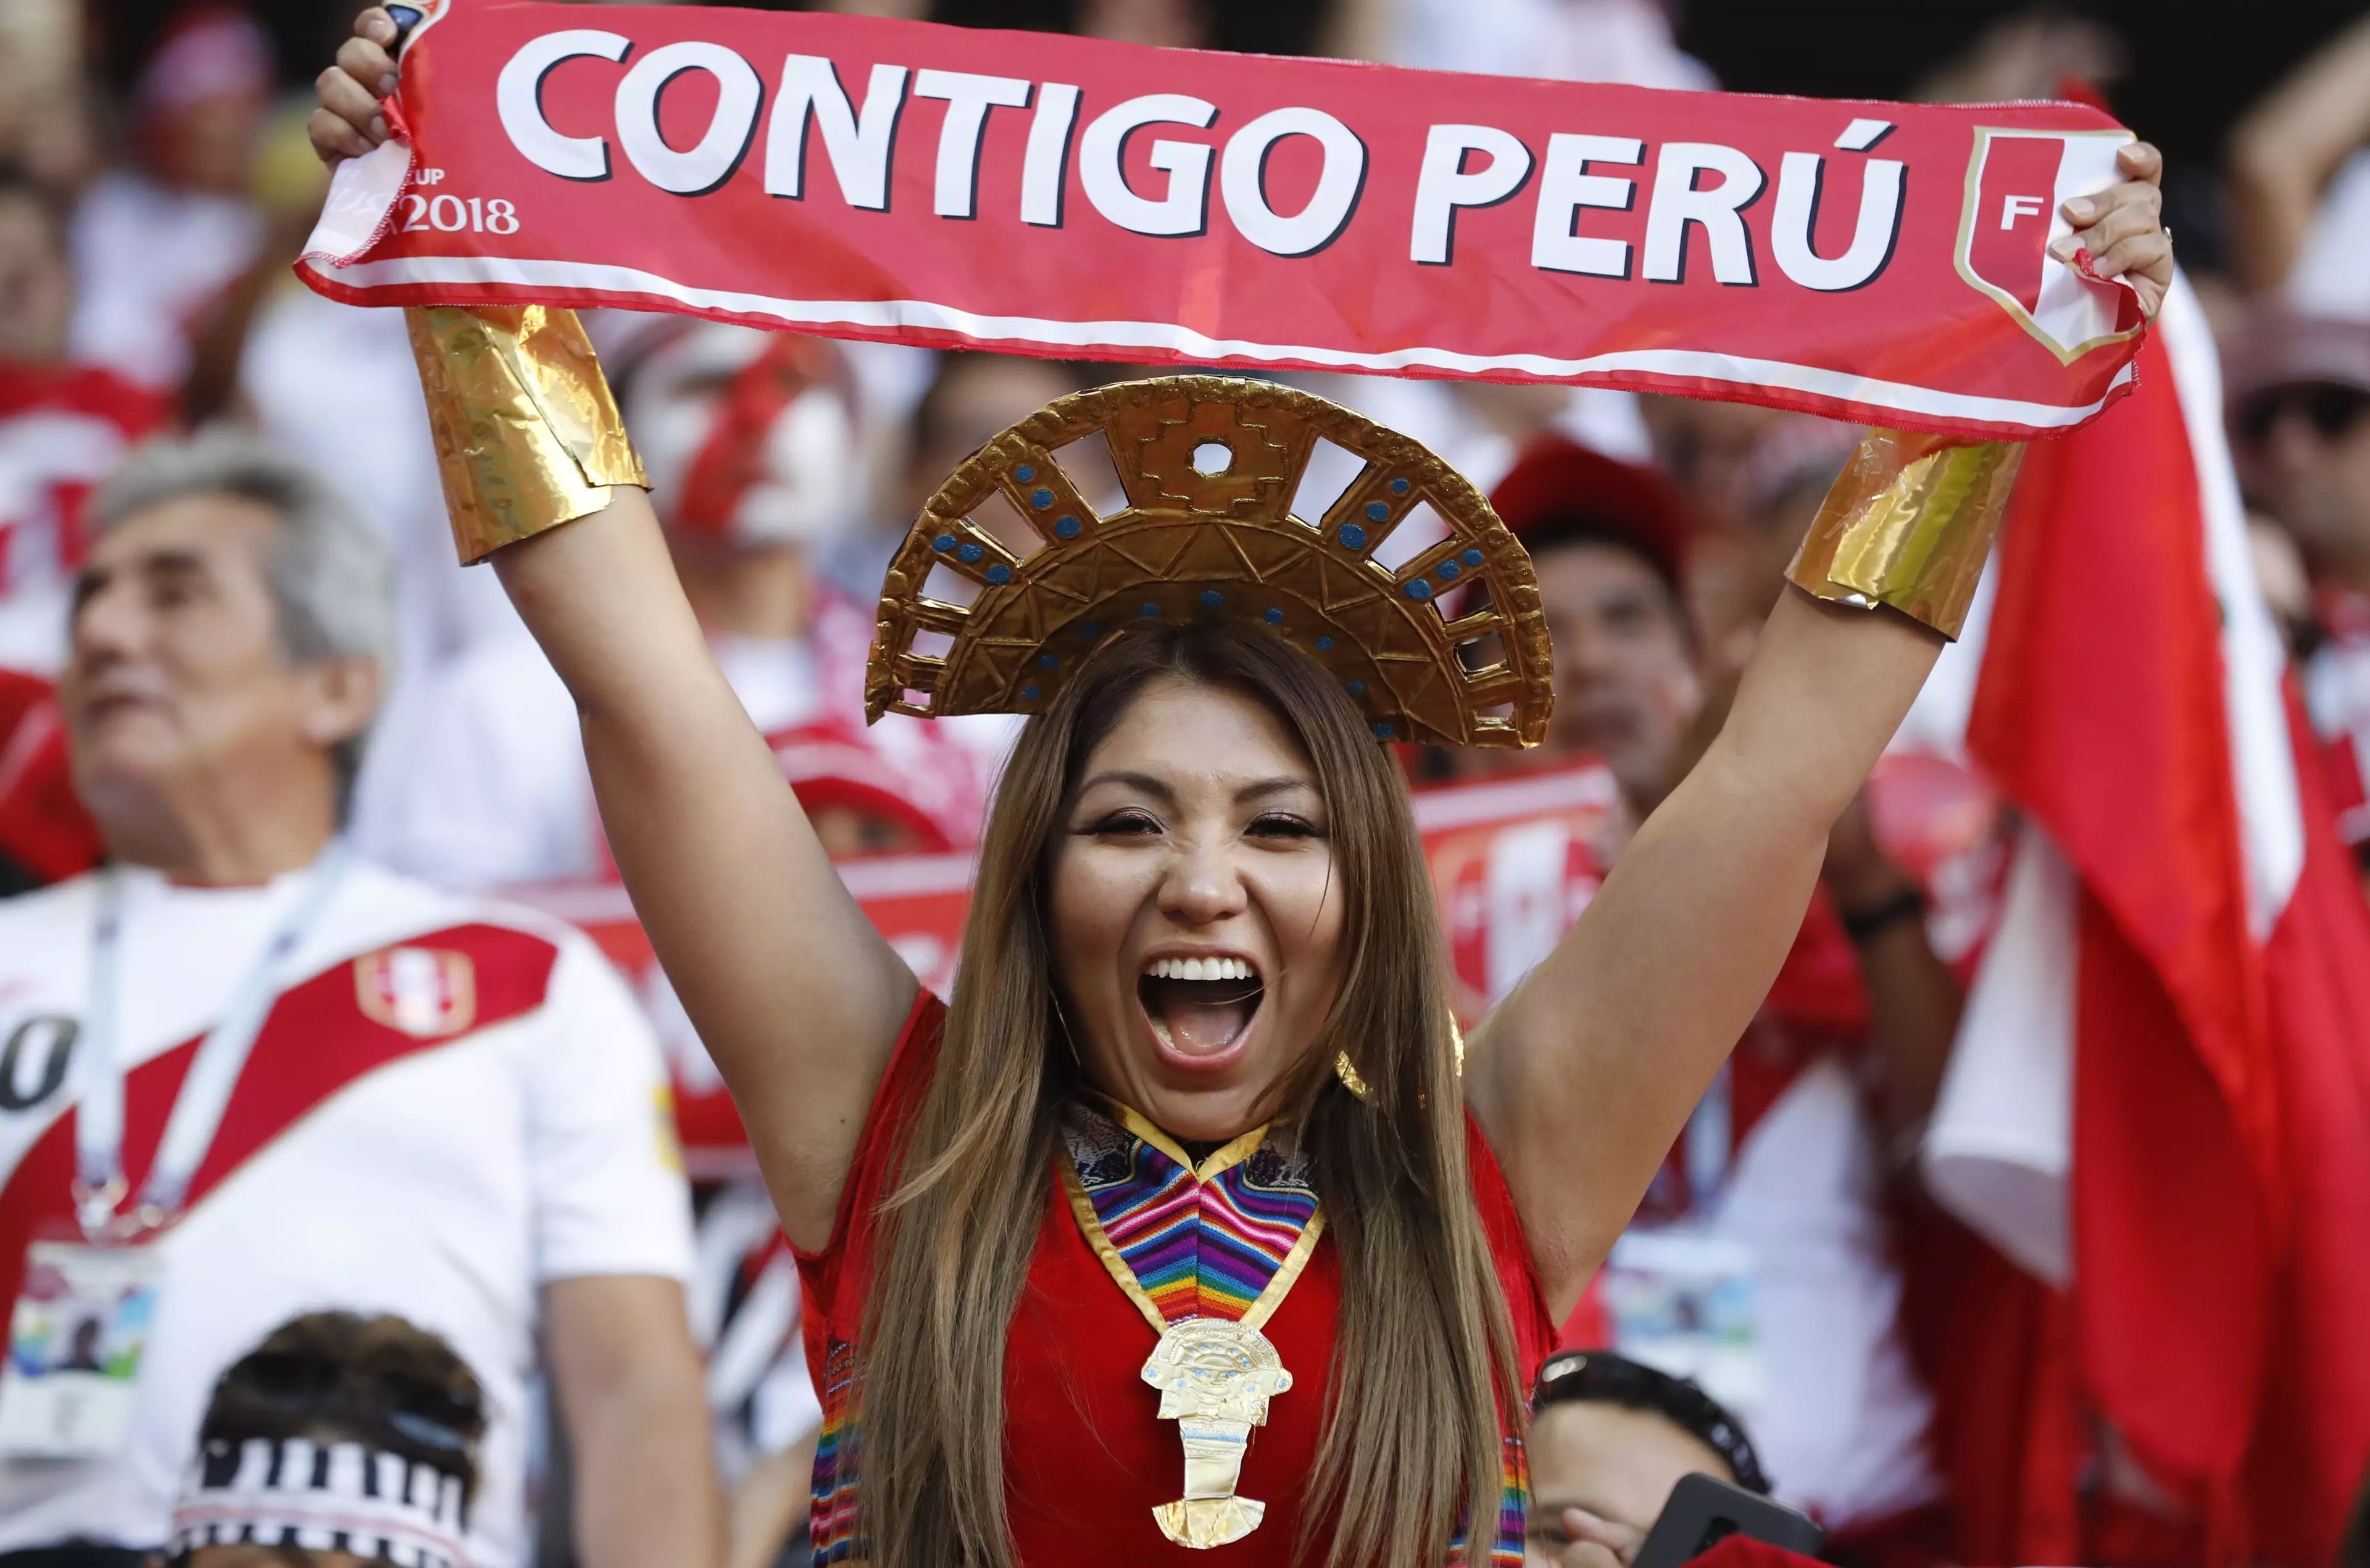 A Peru Fan Reportedly Gained 24kg To Get World Cup Tickets